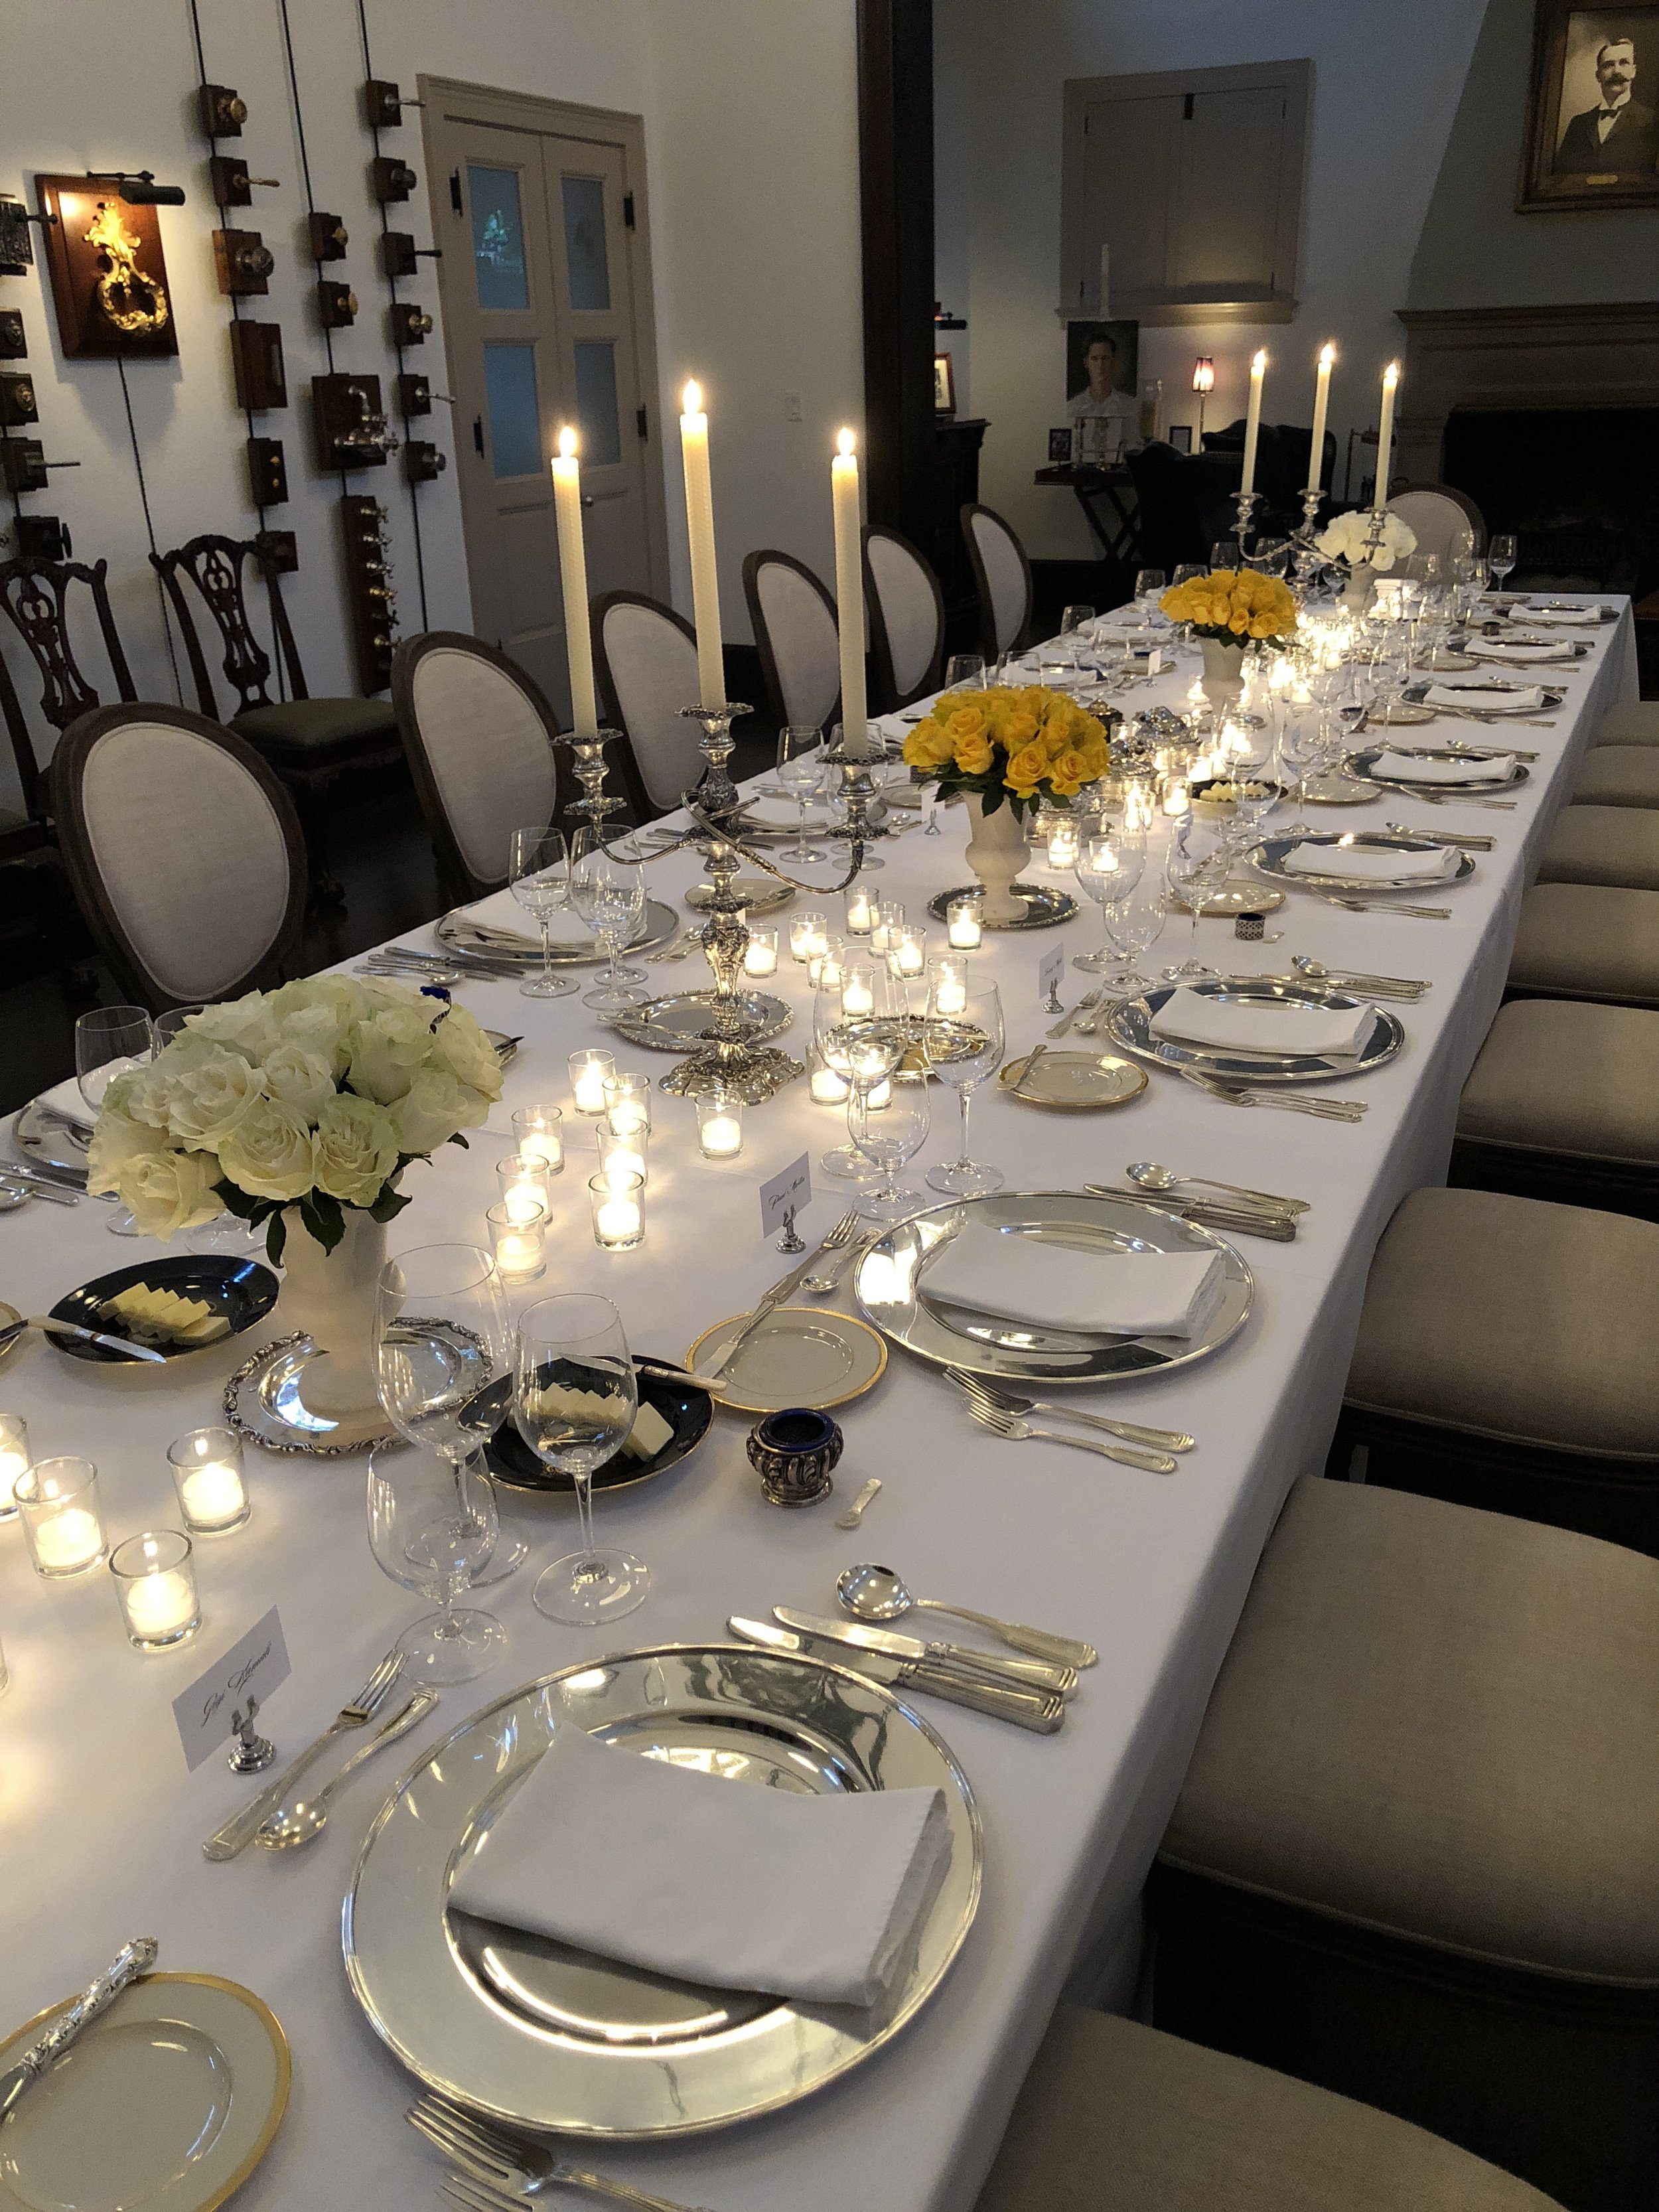 Photo of the Dining Table with Table Setting.JPG